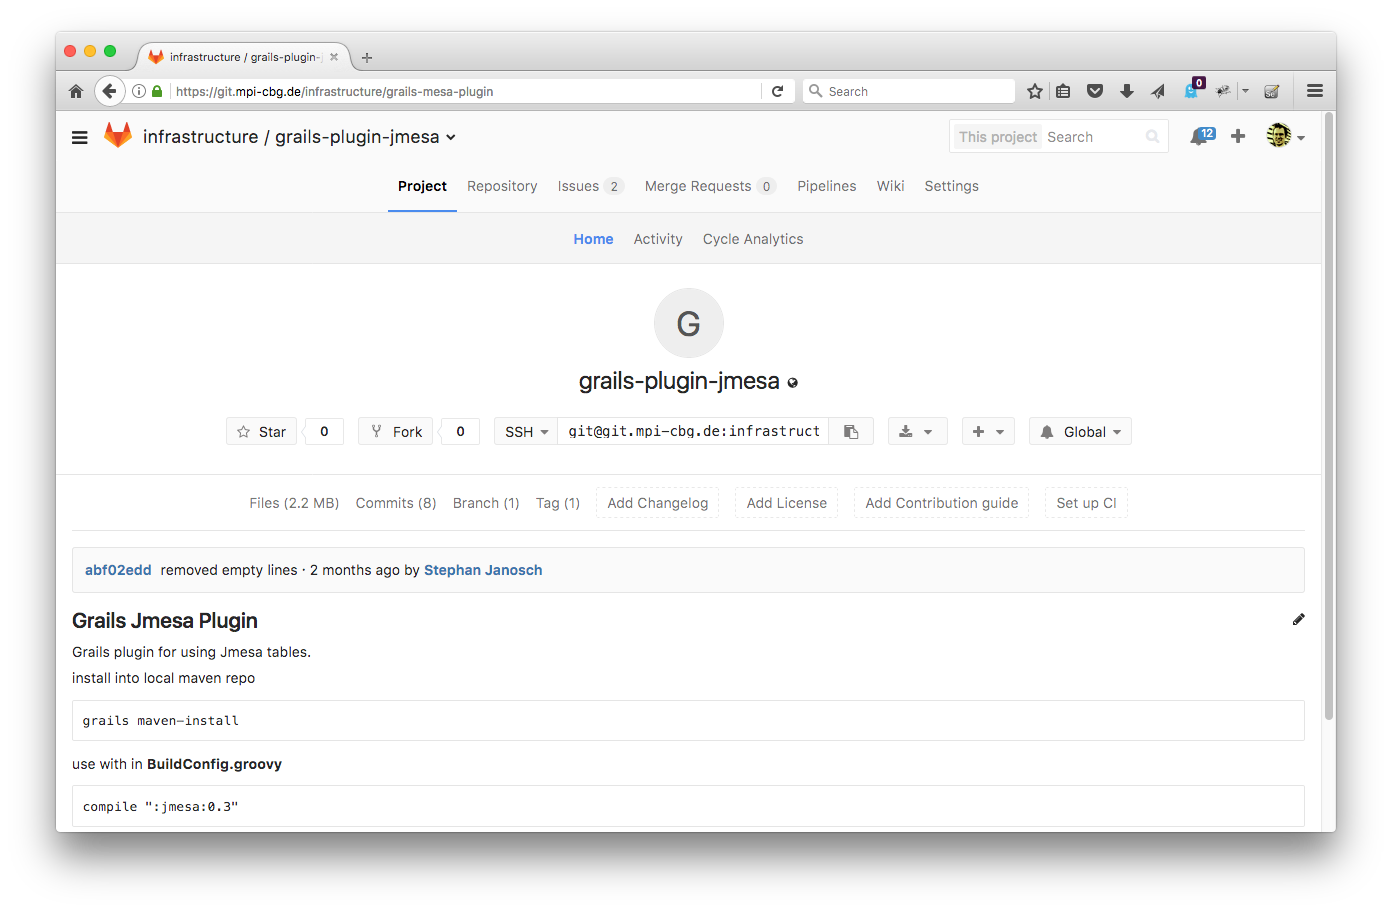 gitlab project page